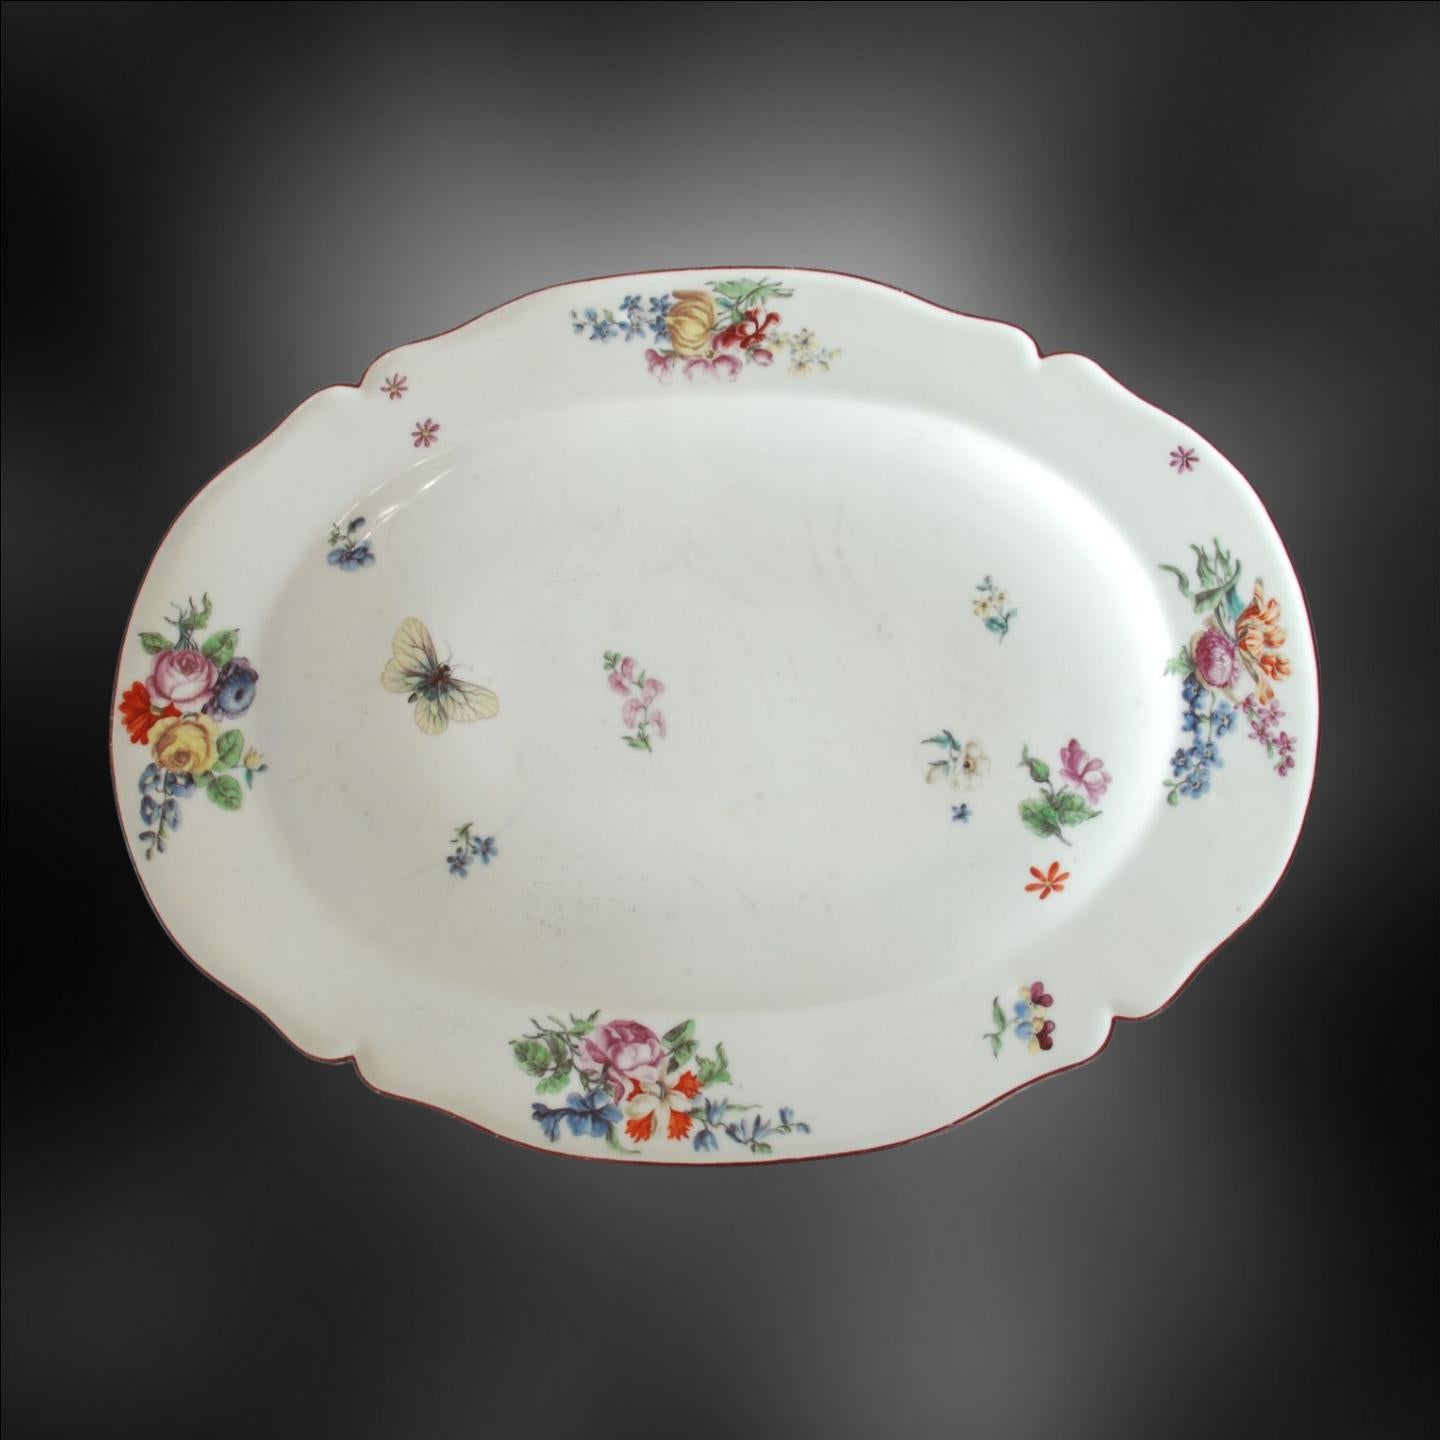 A large platter, probably once associated with tureen. Beautiful flower painting, possible done outside the factory at the Giles studio in London, or perhaps at the Chelsea studio by a painter who had previously worked there. The tulip, heartease,